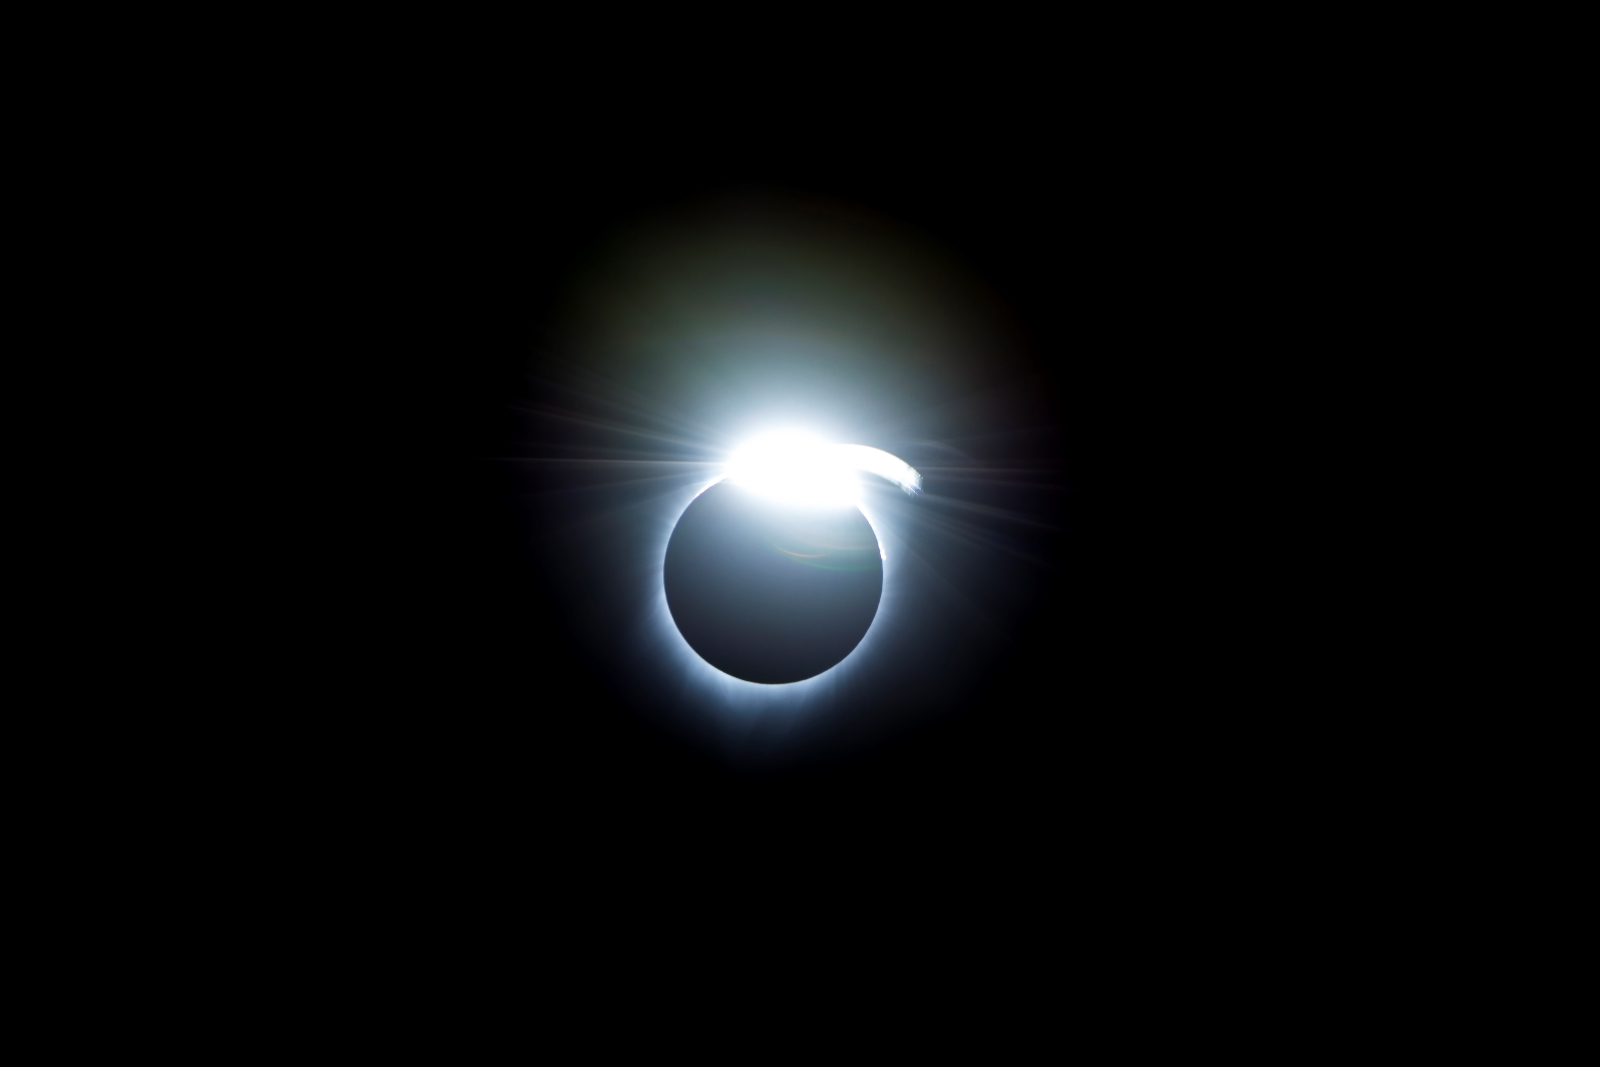 The diamond-ring effect occurred at the beginning and end of totality during a total solar eclipse. As the last bits of sunlight pass through the valleys on the moon's limb, and the faint corona around the Sun is just becoming visible, it looks like a ring with glittering diamonds on it.